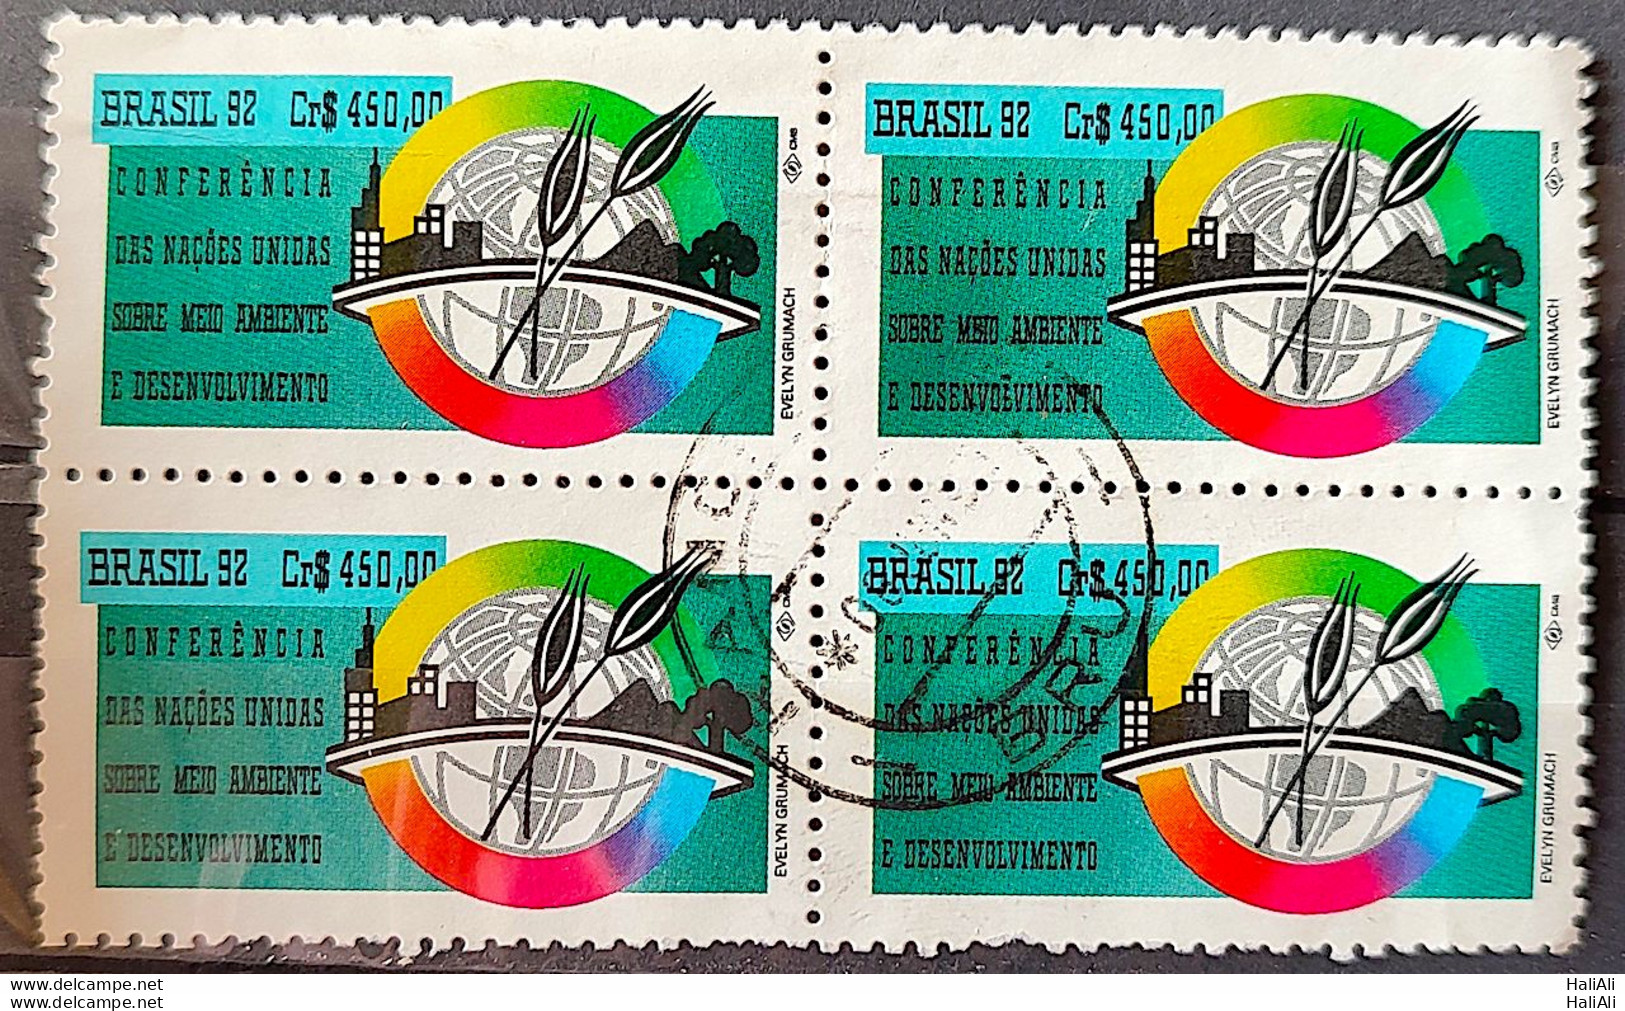 C 1799 Brazil Stamp Conference Eco 92 Rio De Janeiro Environment 1992 Block Of 4 Circulated 1 - Used Stamps